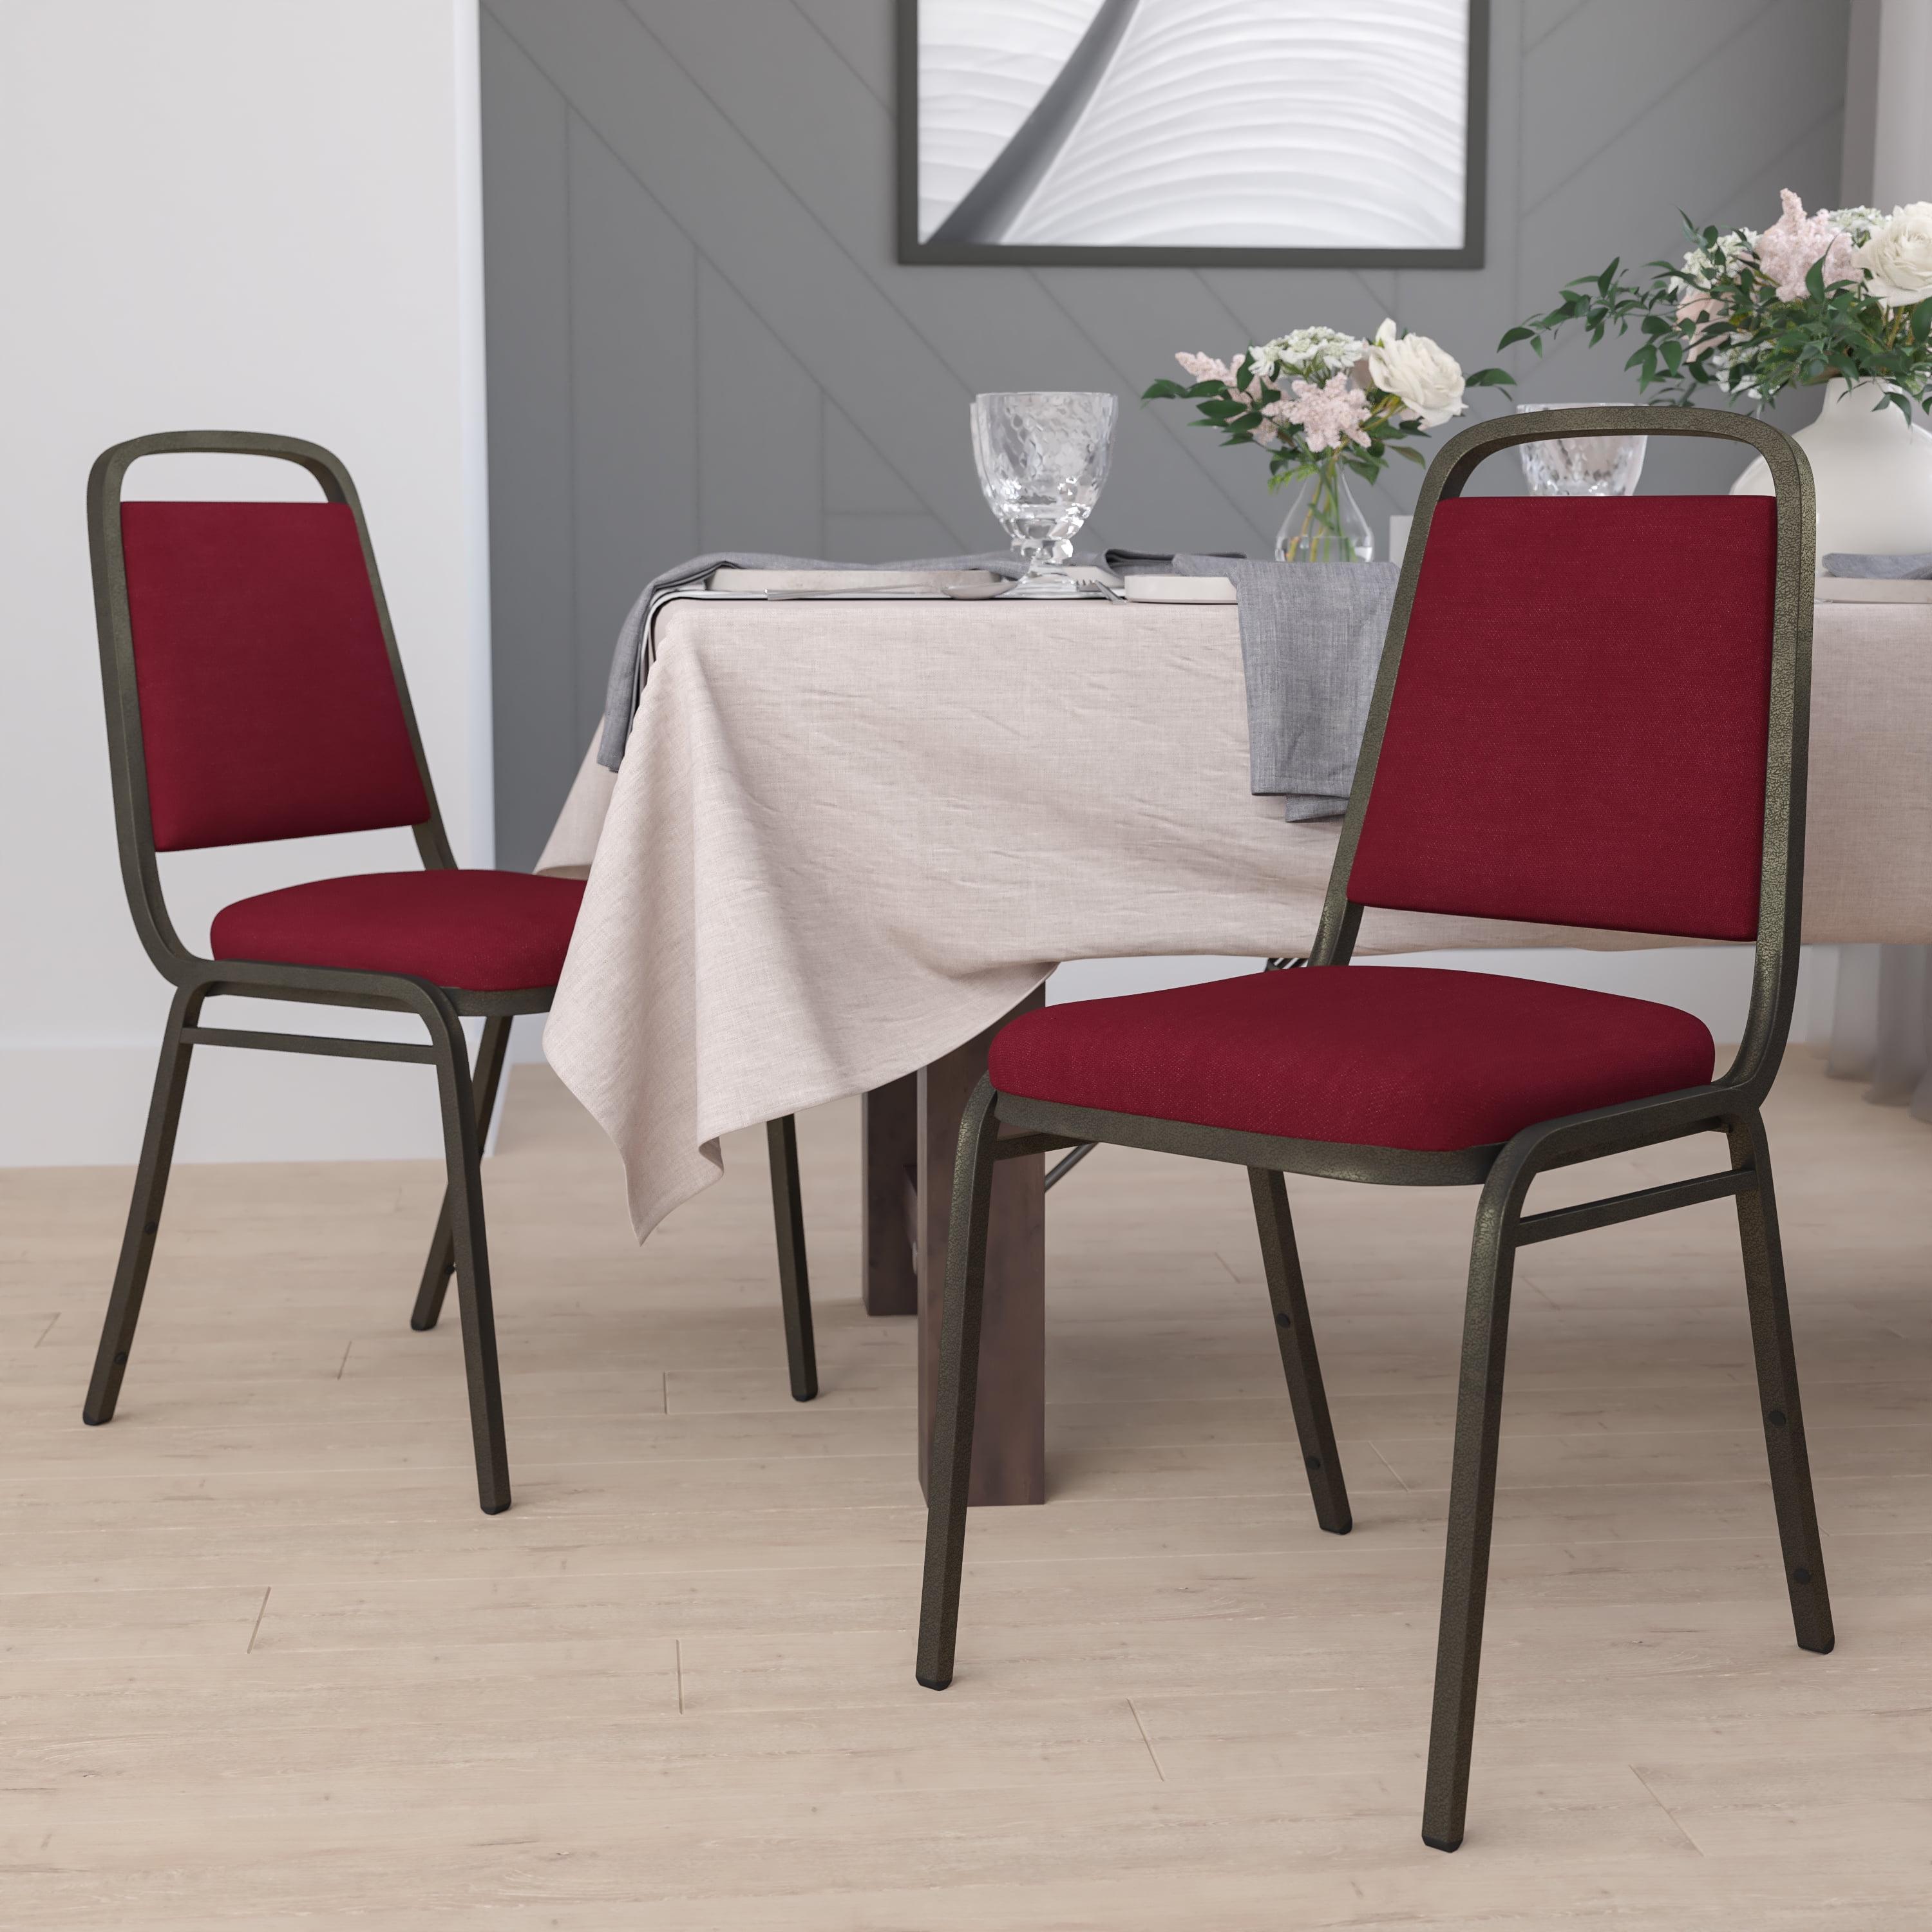 Hercules Series Burgundy Fabric Stacking Banquet Chair with Gold Vein Frame